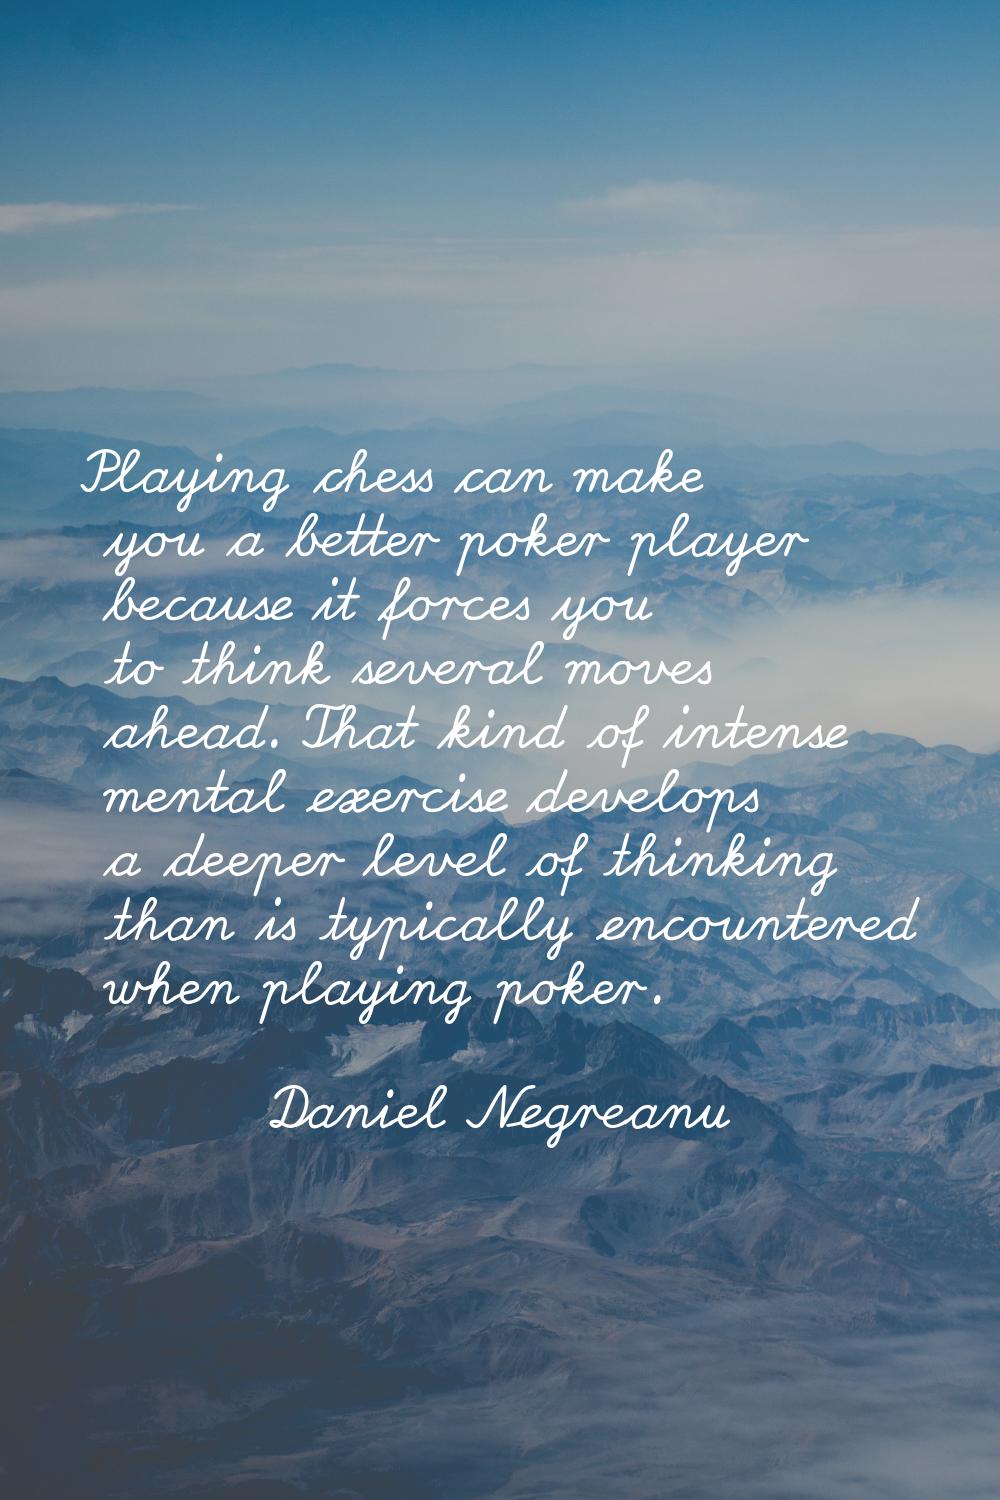 Playing chess can make you a better poker player because it forces you to think several moves ahead